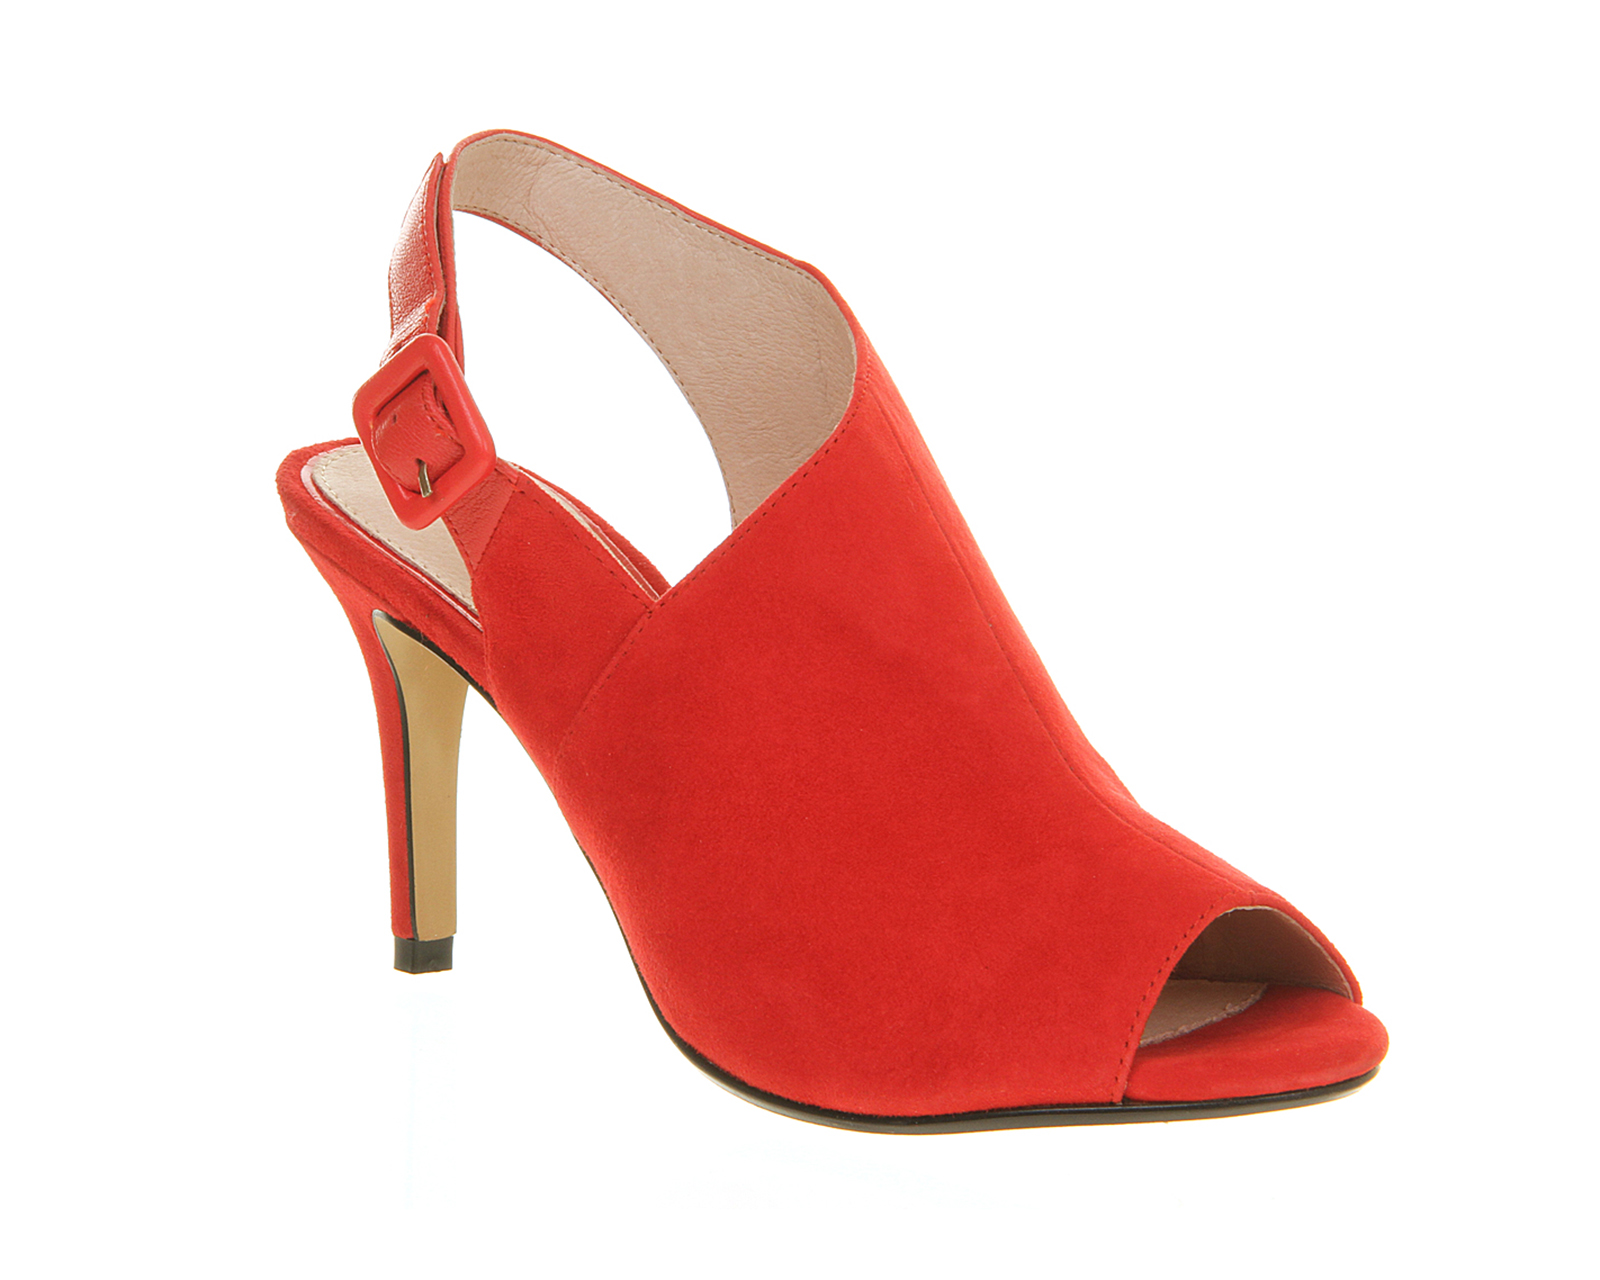 OFFICEGauntlet Cut Out Shoe bootsRed Suede